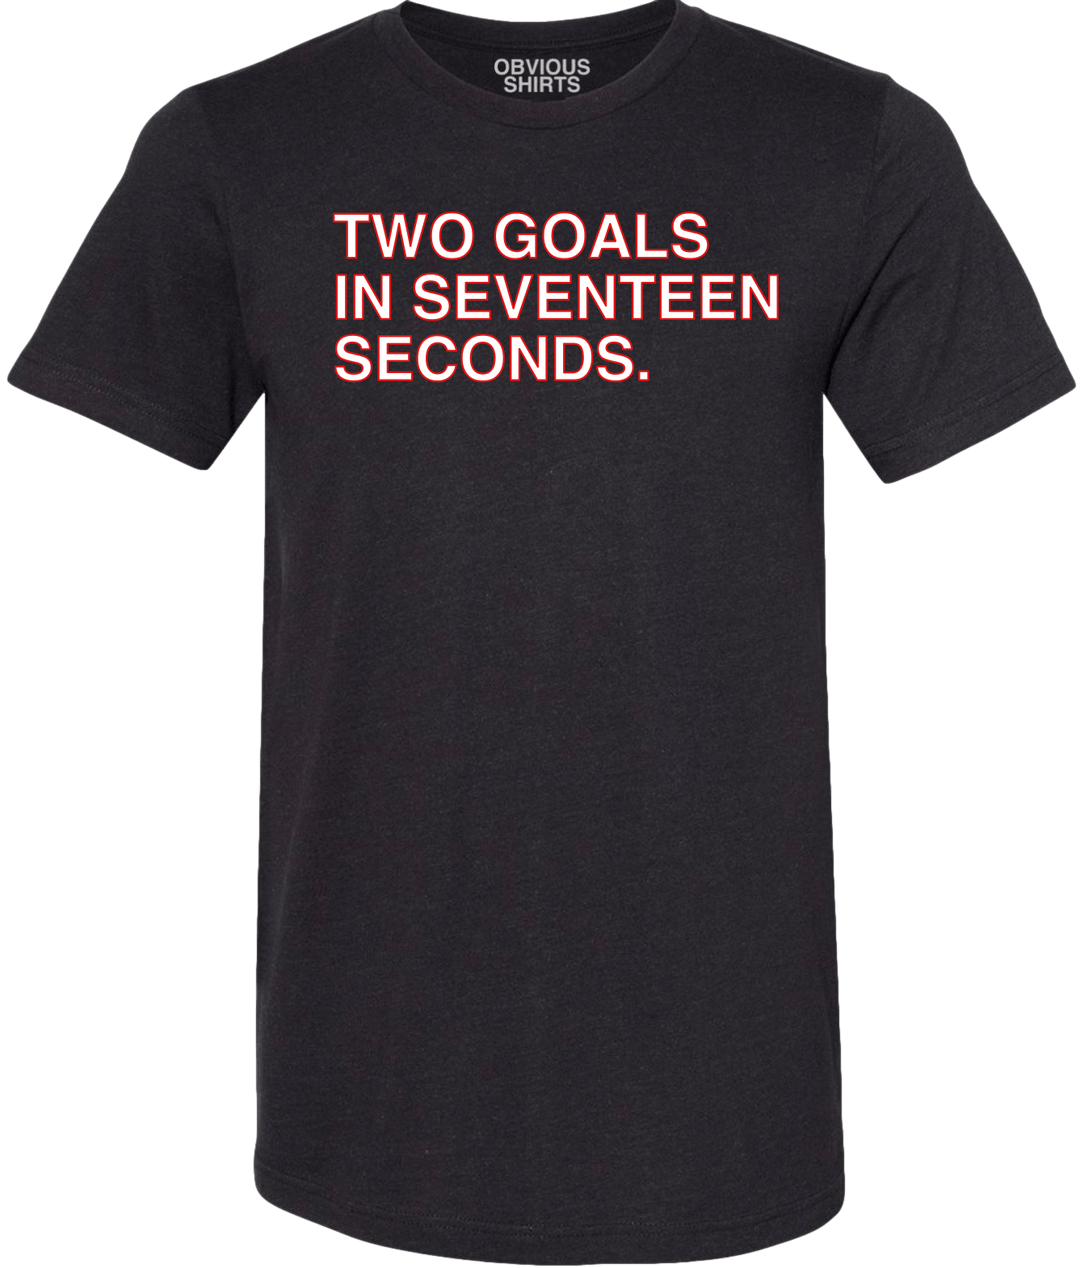 TWO GOALS IN SEVENTEEN SECONDS. (BLACK) - OBVIOUS SHIRTS